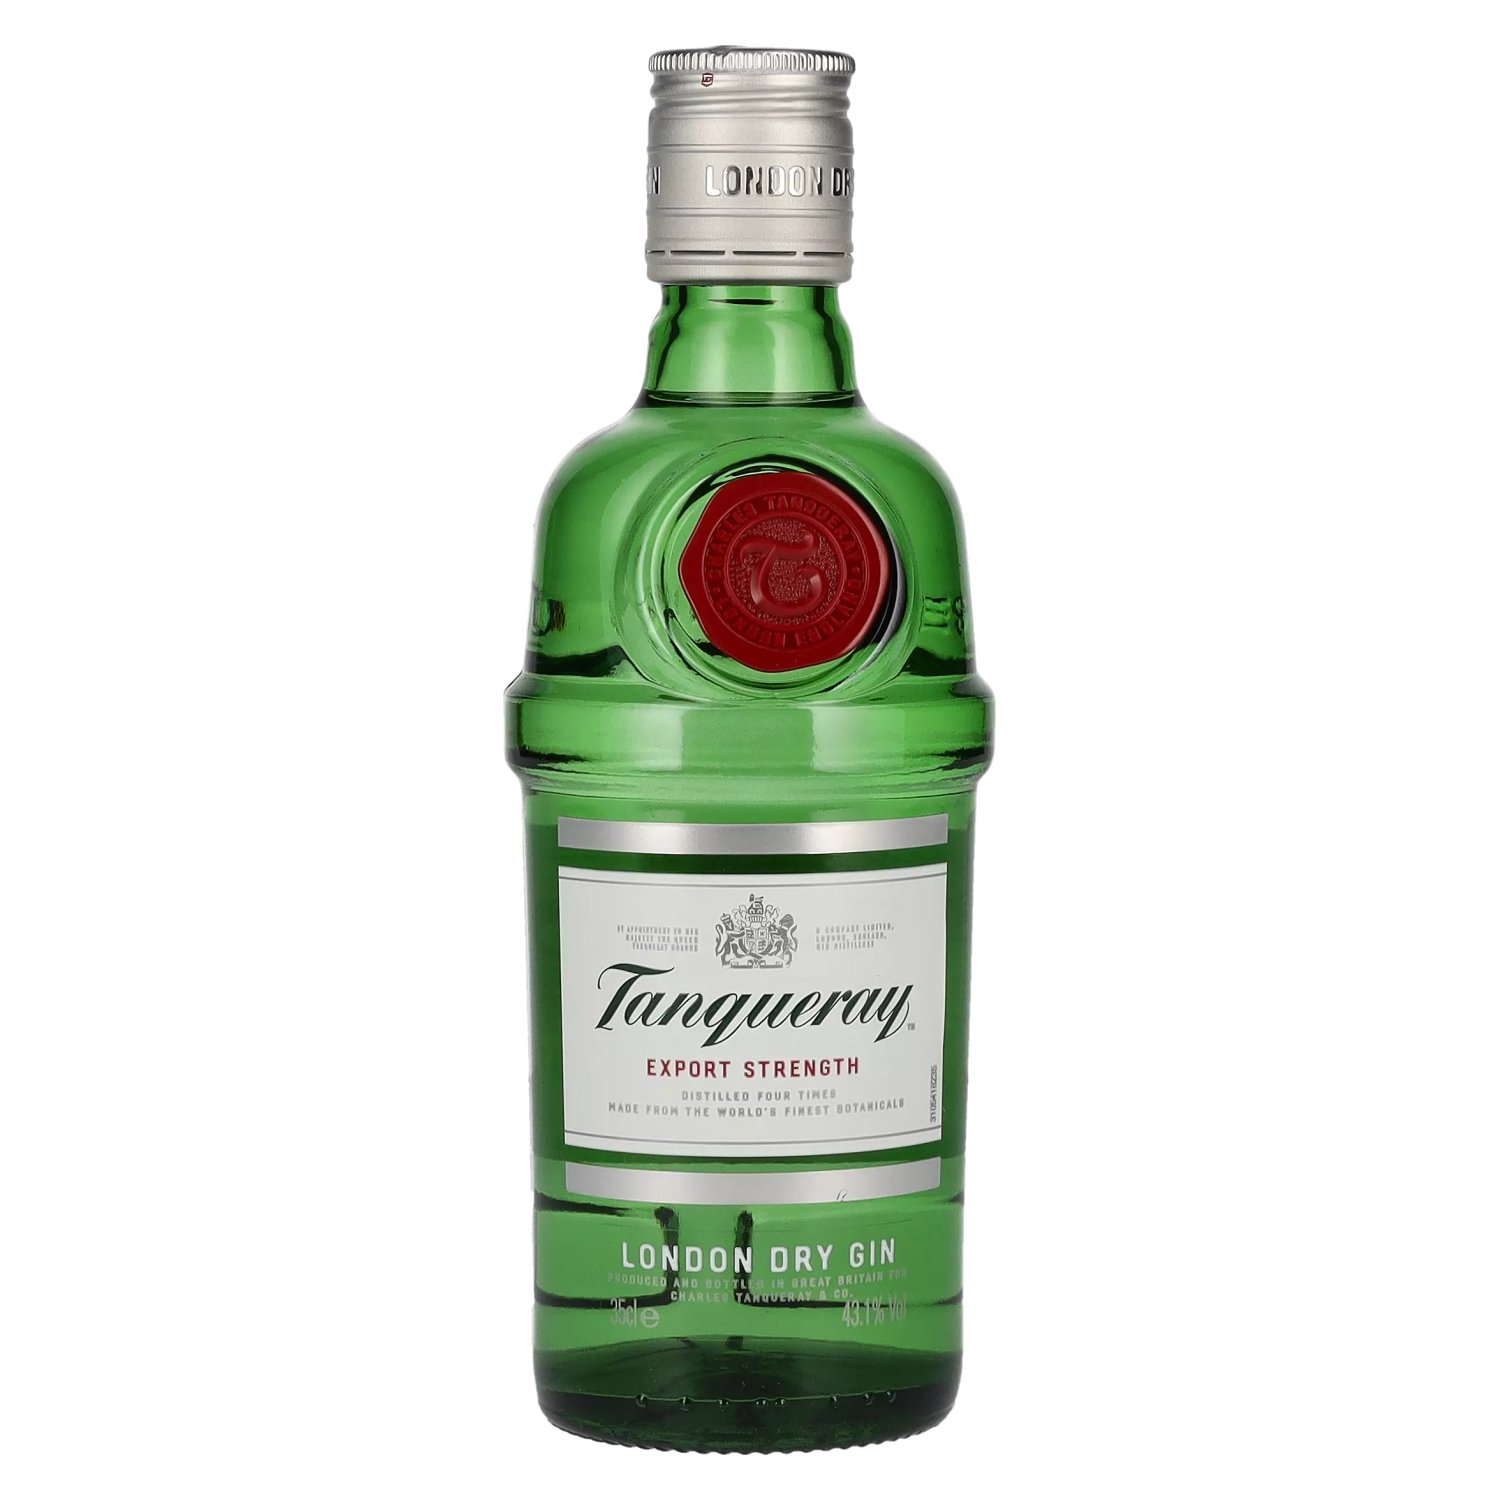 GIN Tanqueray 43,1% Strength 0,35l Vol. DRY Export LONDON